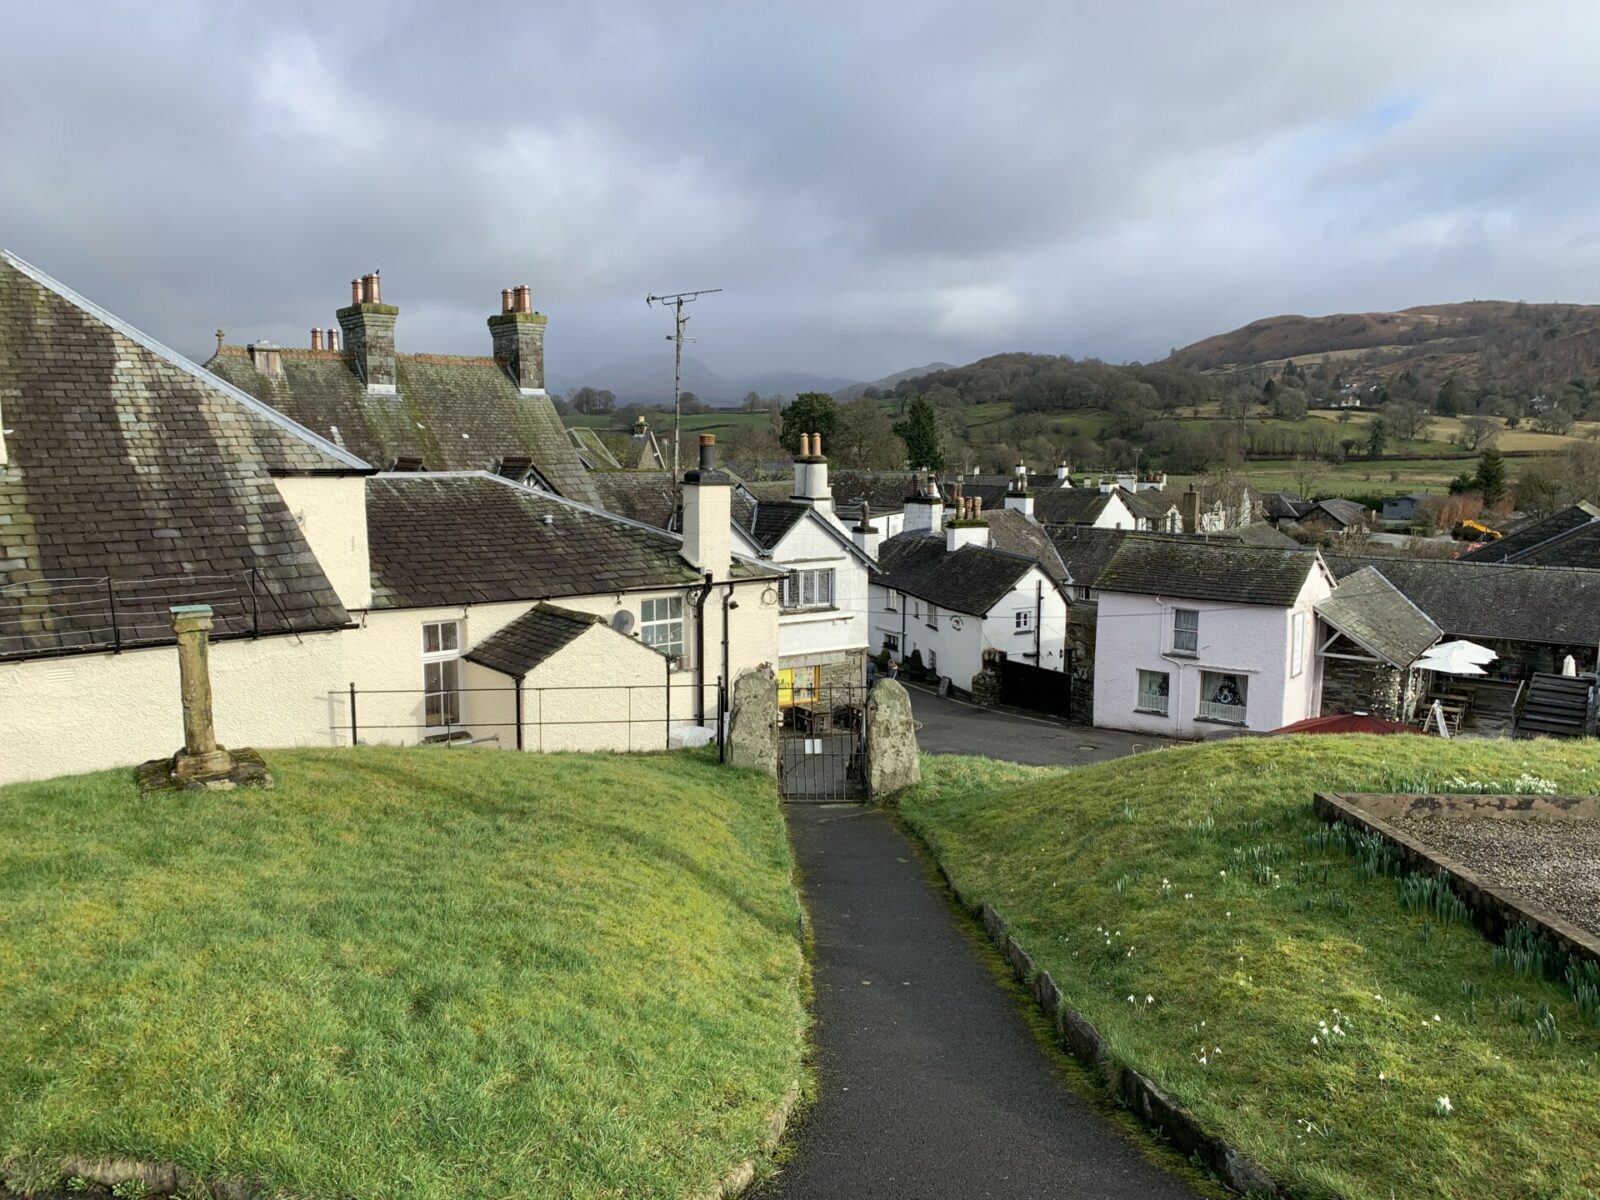 Hawkshead: A Picturesque Village in the Heart of the Lake District